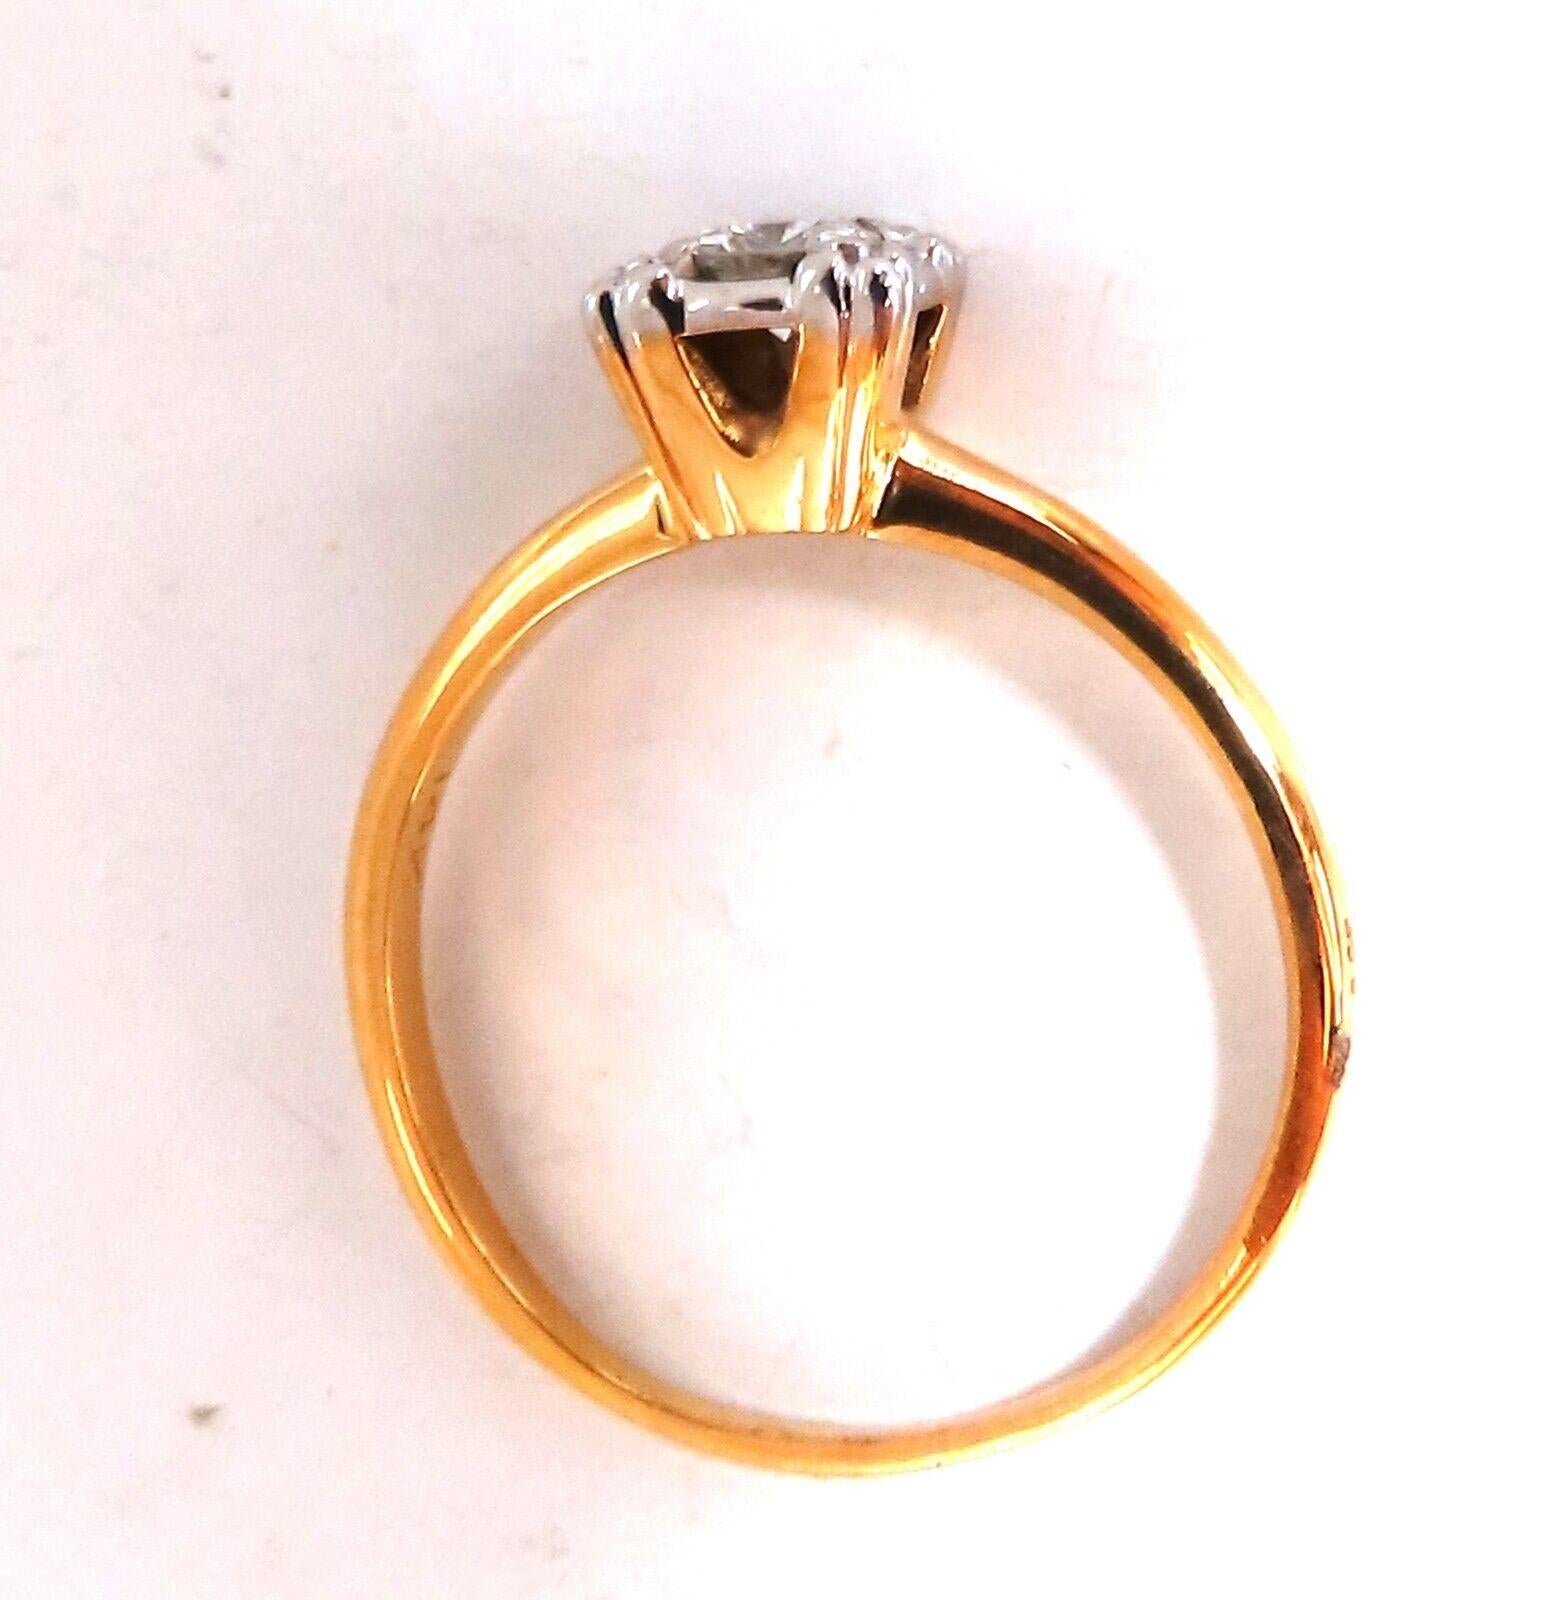 Vintage style solitaire diamond ring.

.35 carat natural round diamond

I color vs2 clarity

14 karat yellow gold

Current size 7.75

We may resize, please inquire.

Ring weight 2.3 g

Depth of ring 6.2 mm

Top deck 6.3 x 6.7 mm